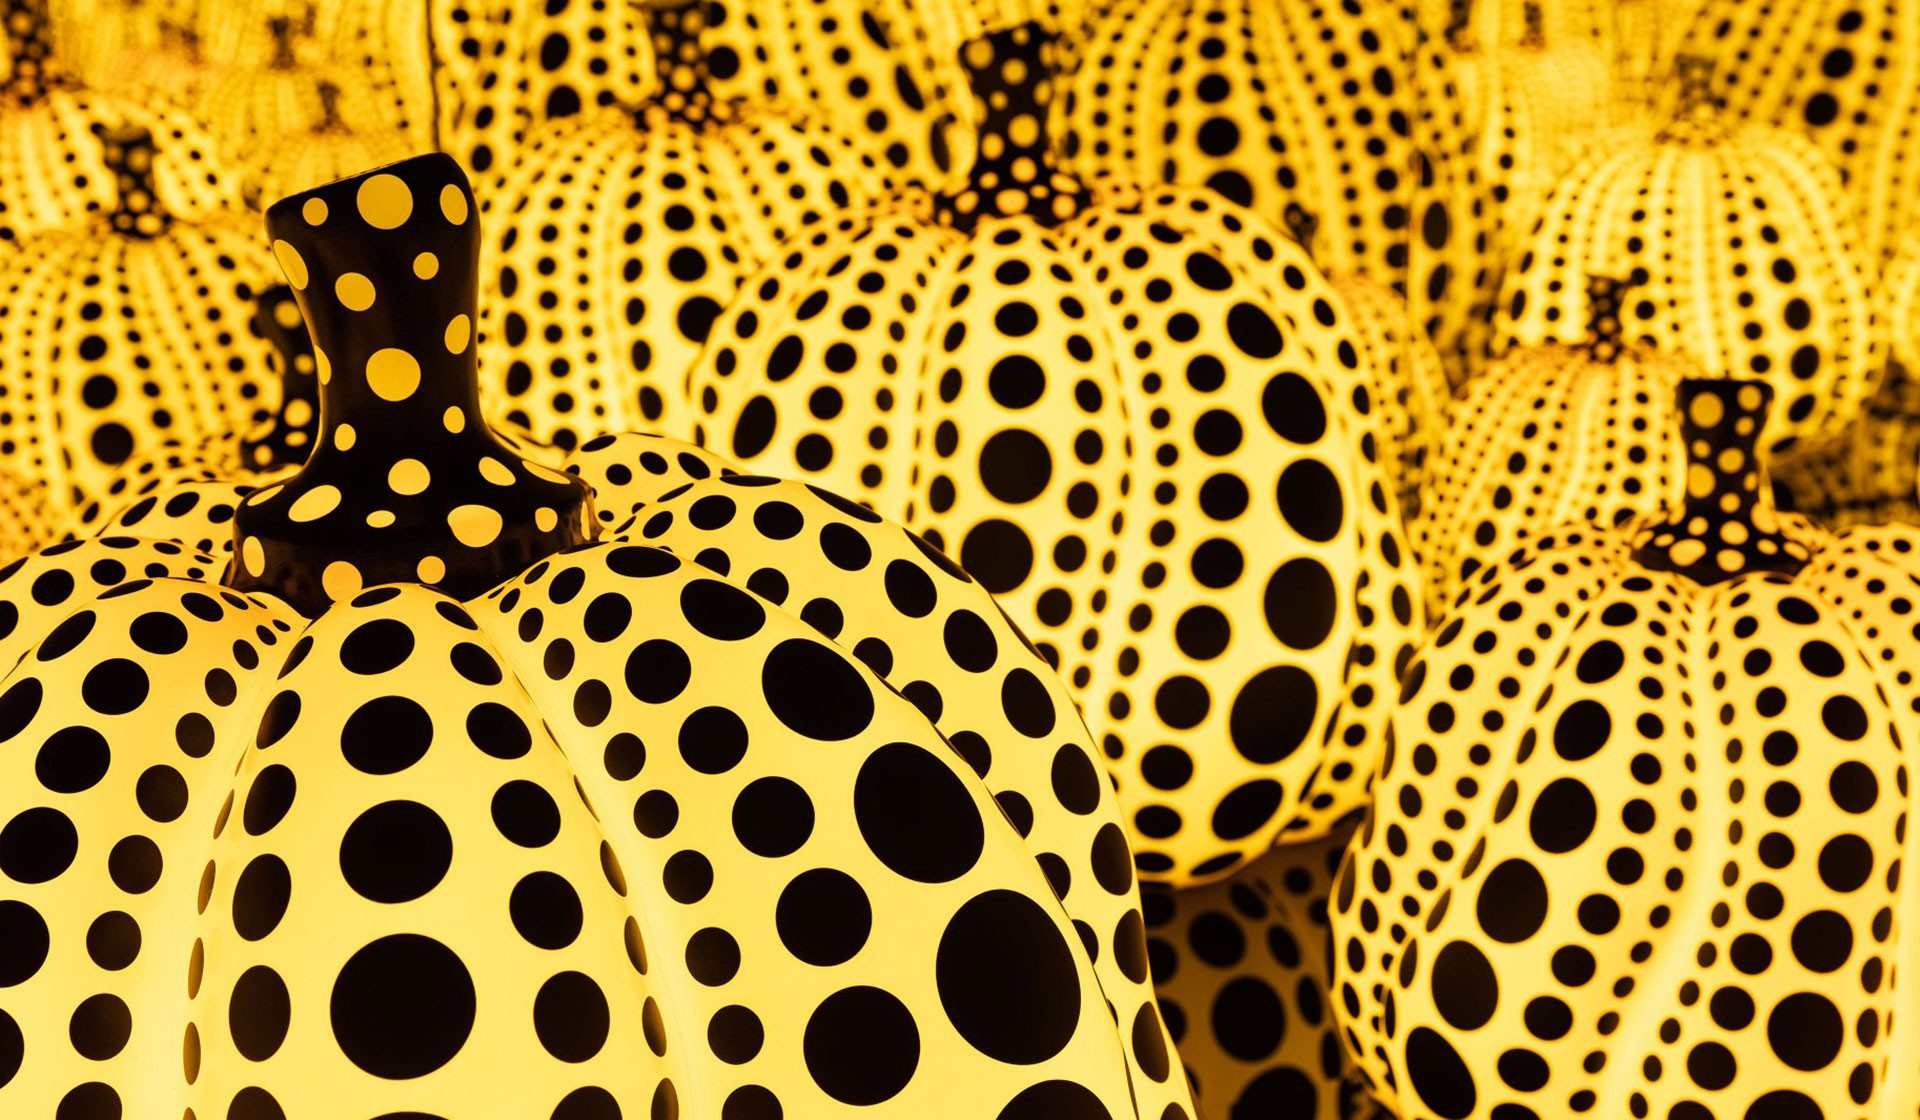 Yayoi Kusama’s ‘All the Eternal Love I Have for the Pumpkins’